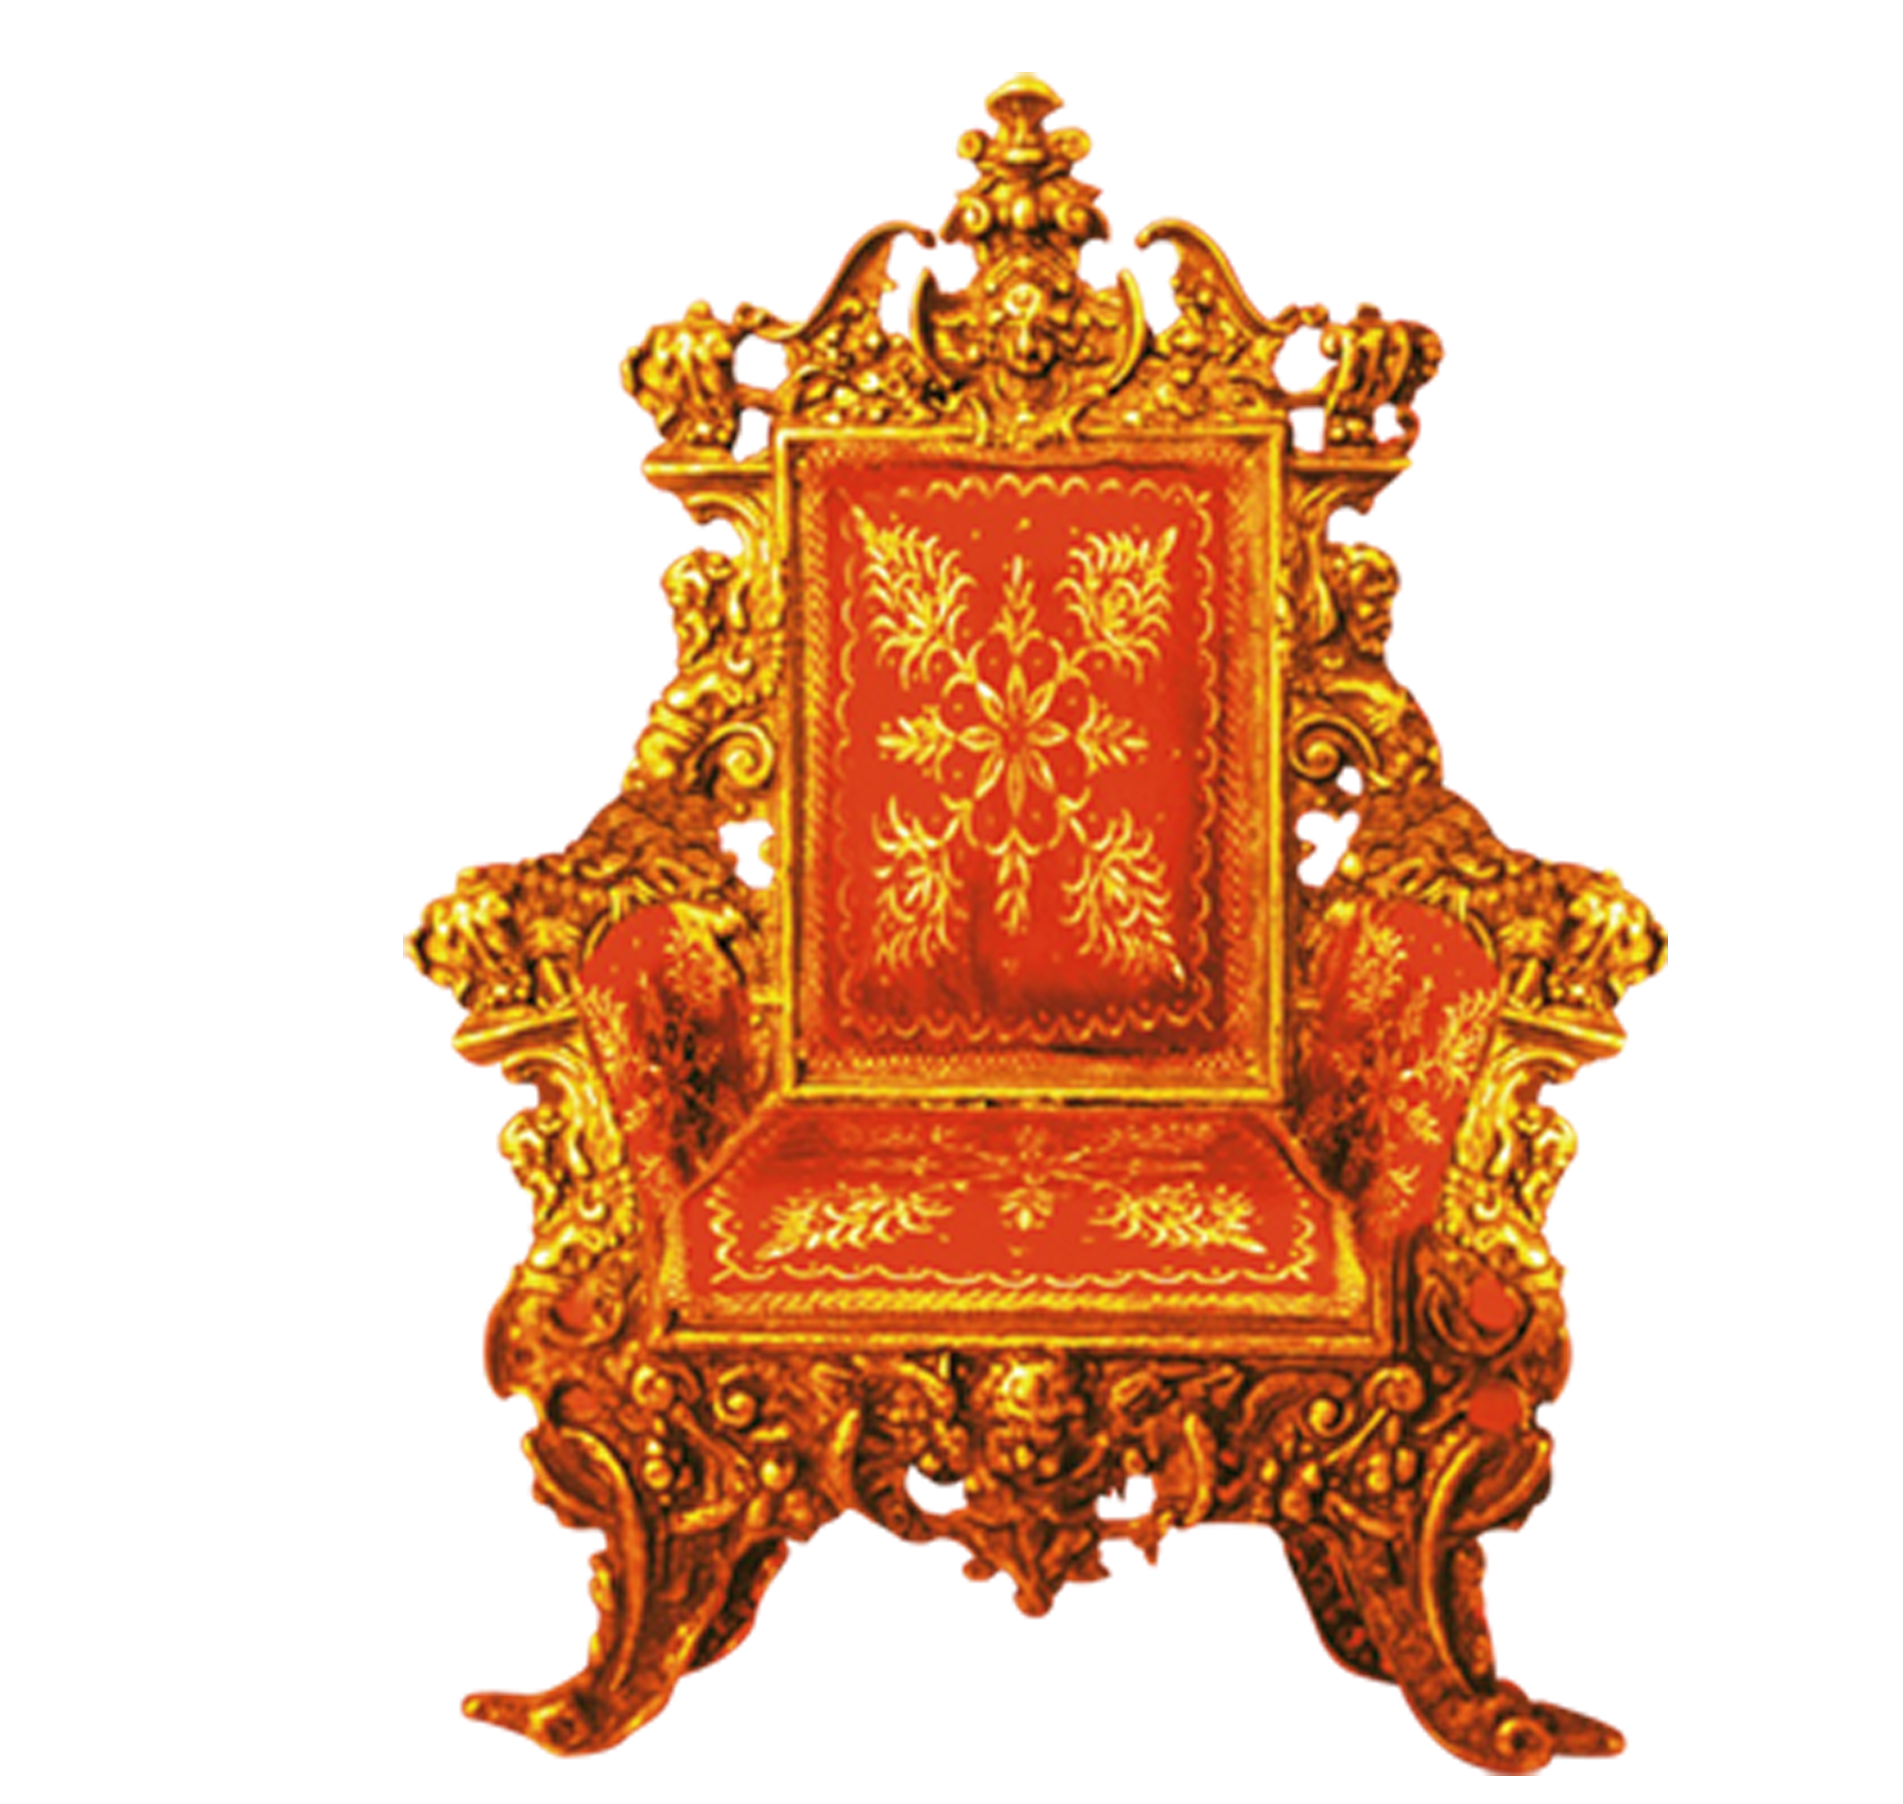 Throne Golden Chair Antique HD Image Free PNG PNG Image